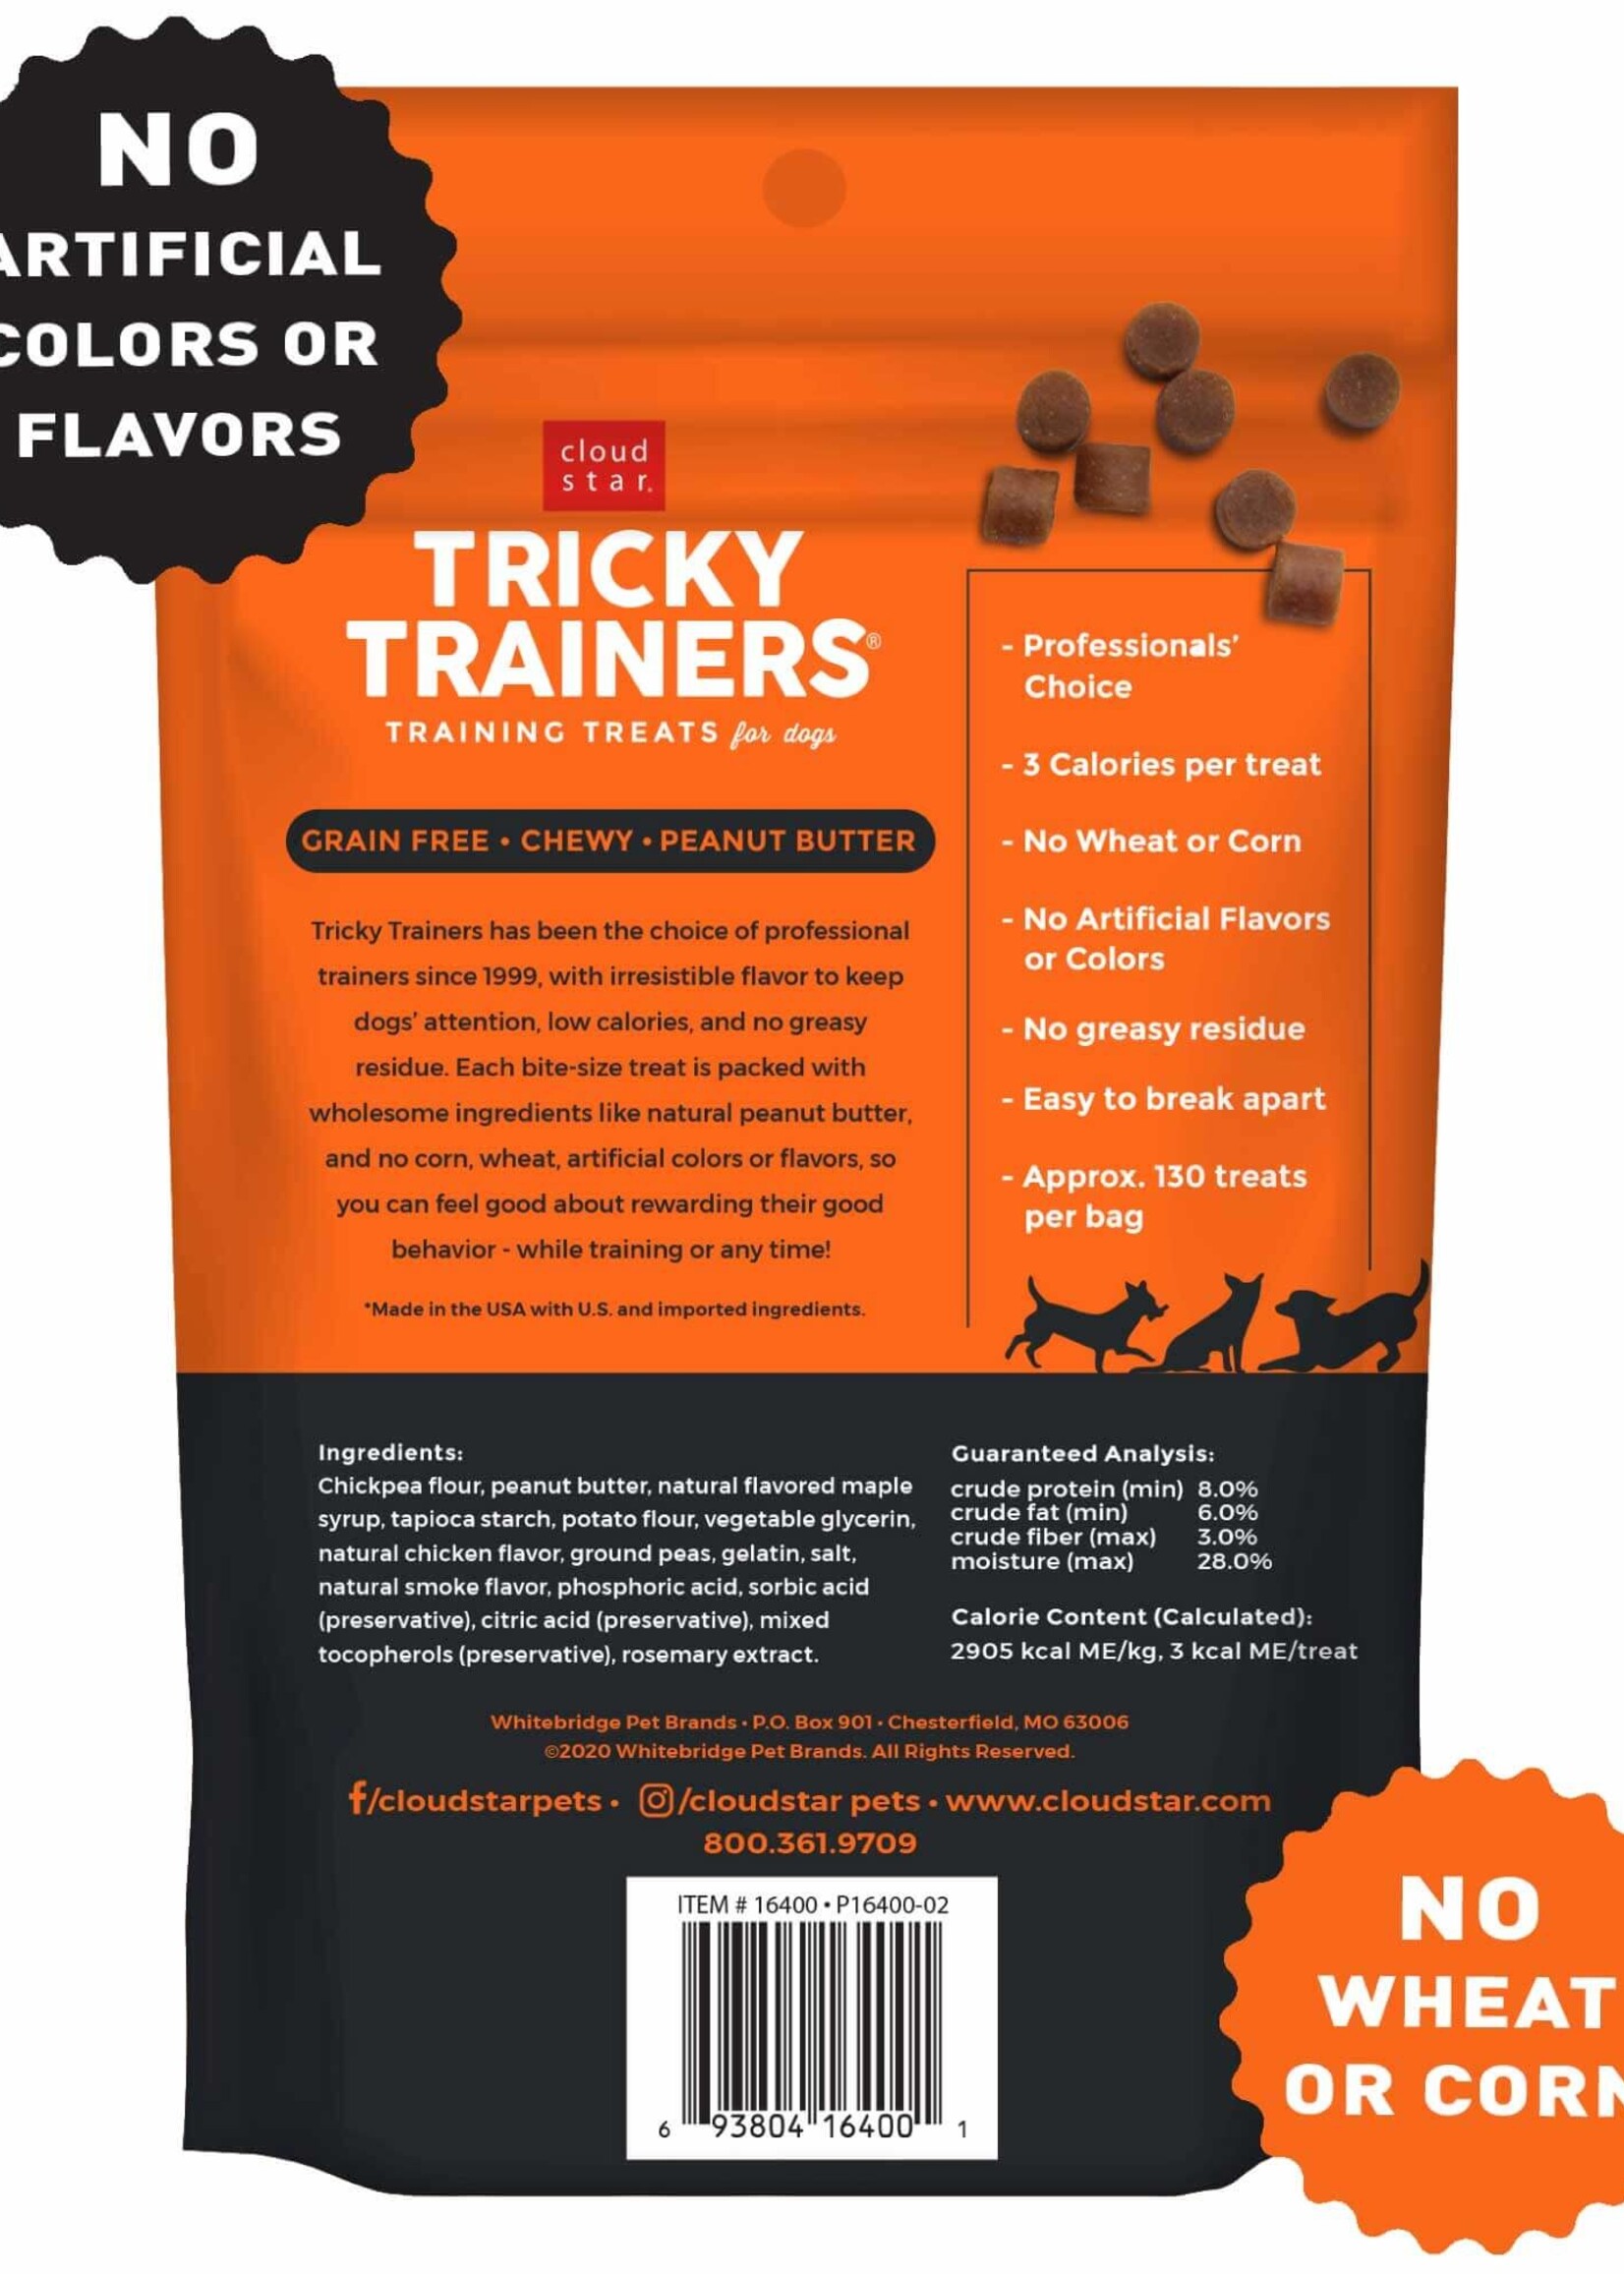 Cloud Star Cloud Star Tricky Trainers Grain-Free Soft & Chewy with Peanut Butter Training Dog Treats